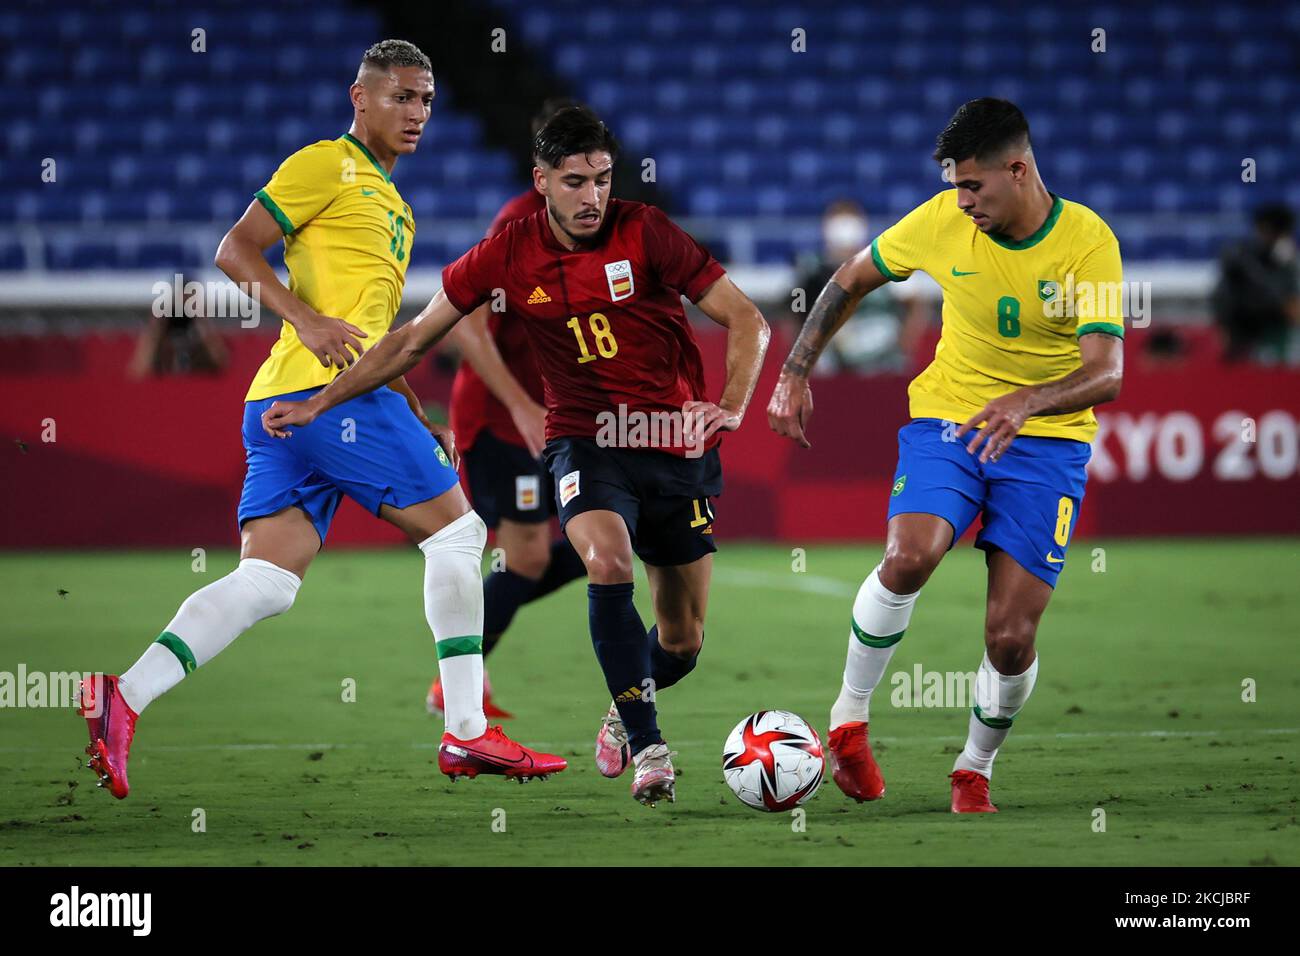 (8) Bruno GUIMARAES of Team Brazil competes for the ball with (18) Oscar GIL of Team Spain during The match between Brazil and Spain on day Fifteenth of the Tokyo 2020 Olympic Games at International Stadium Yokohama on August 07, 2021 in Yokohama, Kanagawa, Japan (Photo by Ayman Aref/NurPhoto) Stock Photo